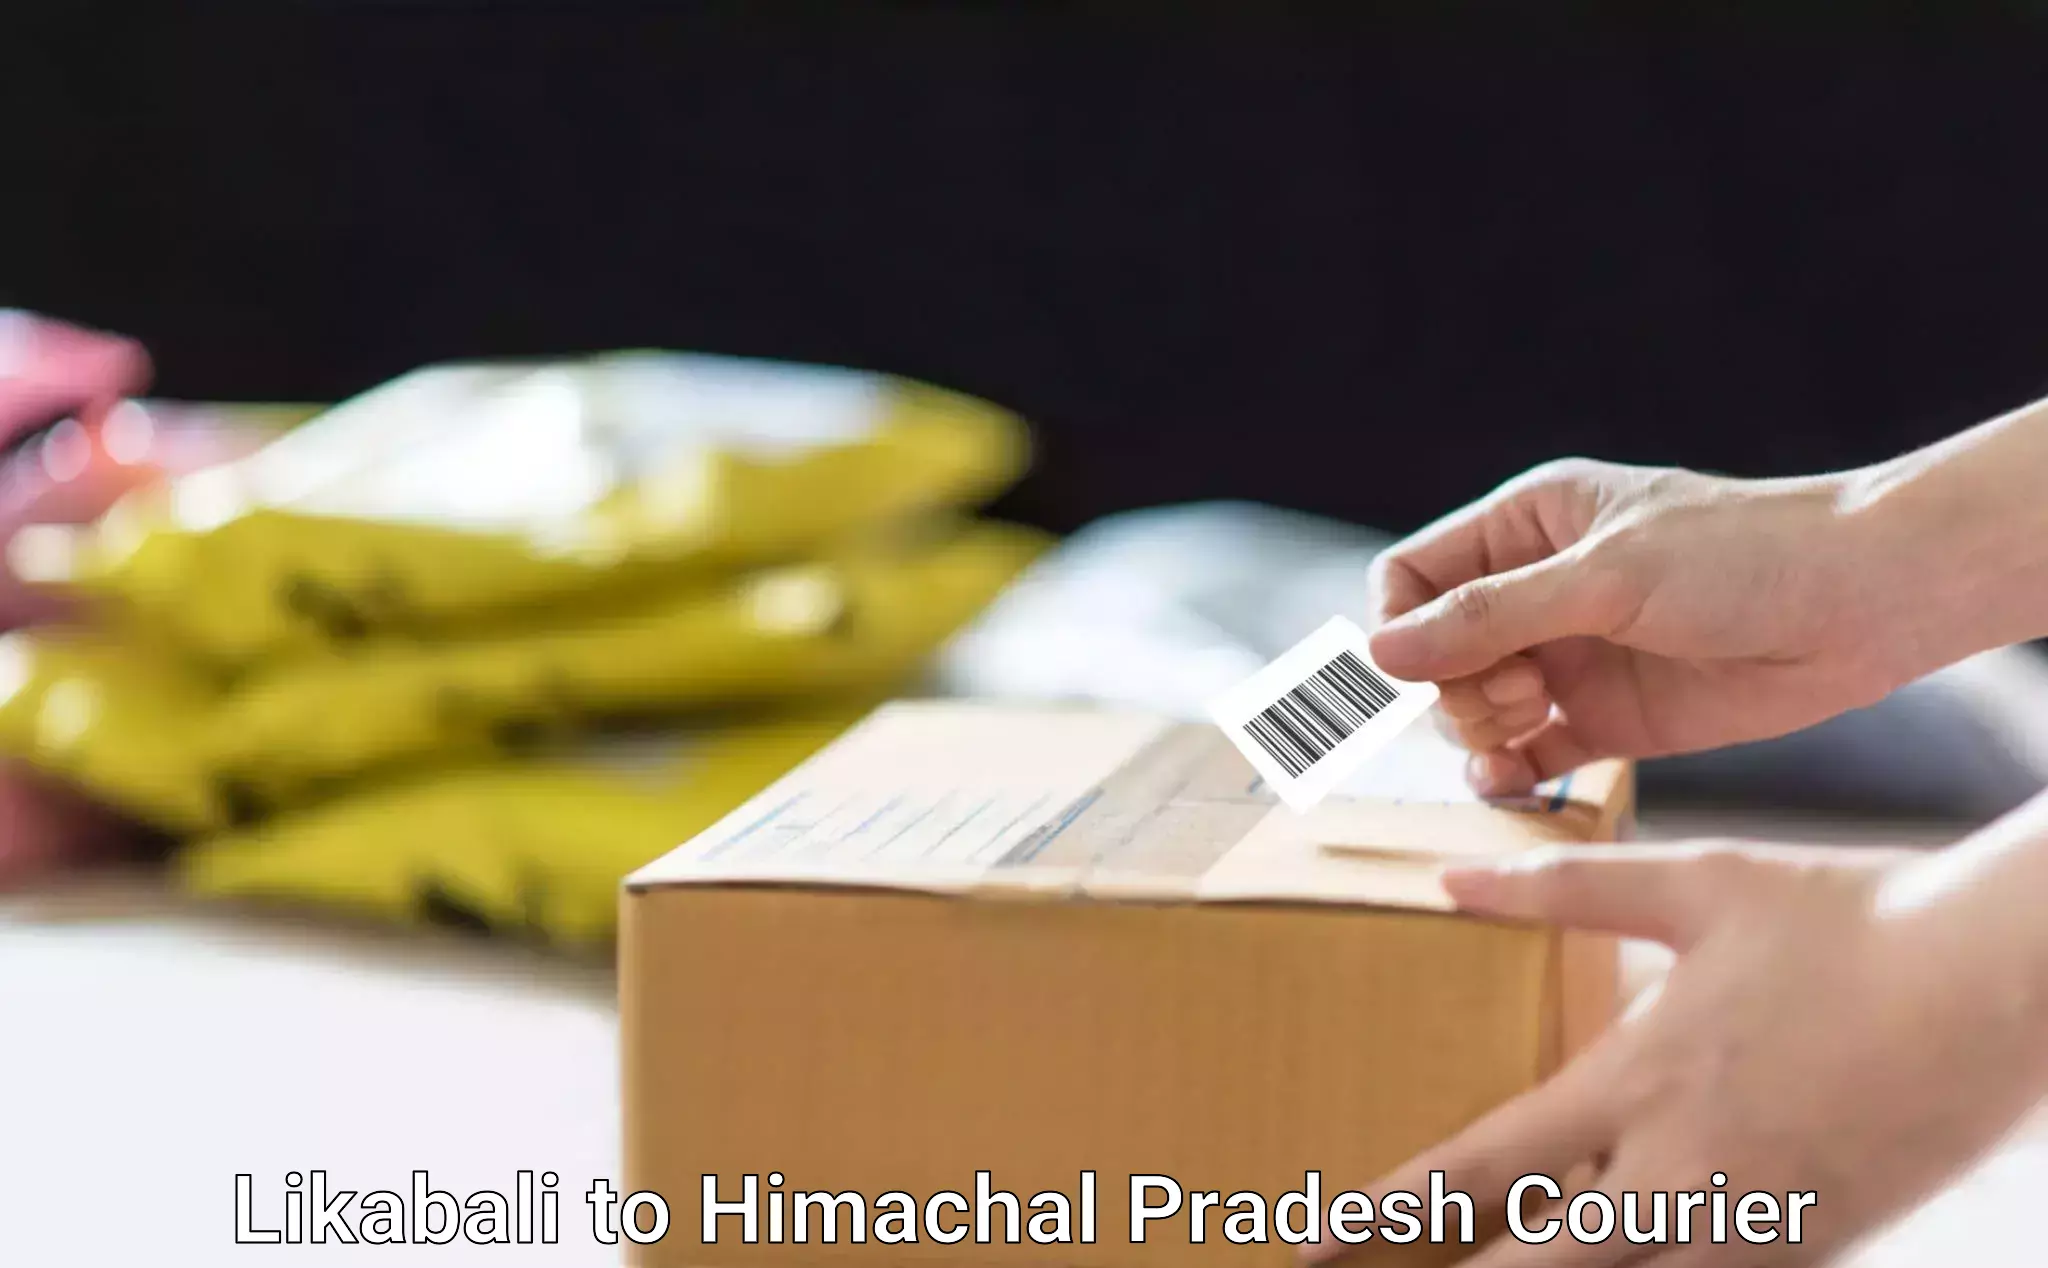 Efficient package consolidation Likabali to Himachal Pradesh